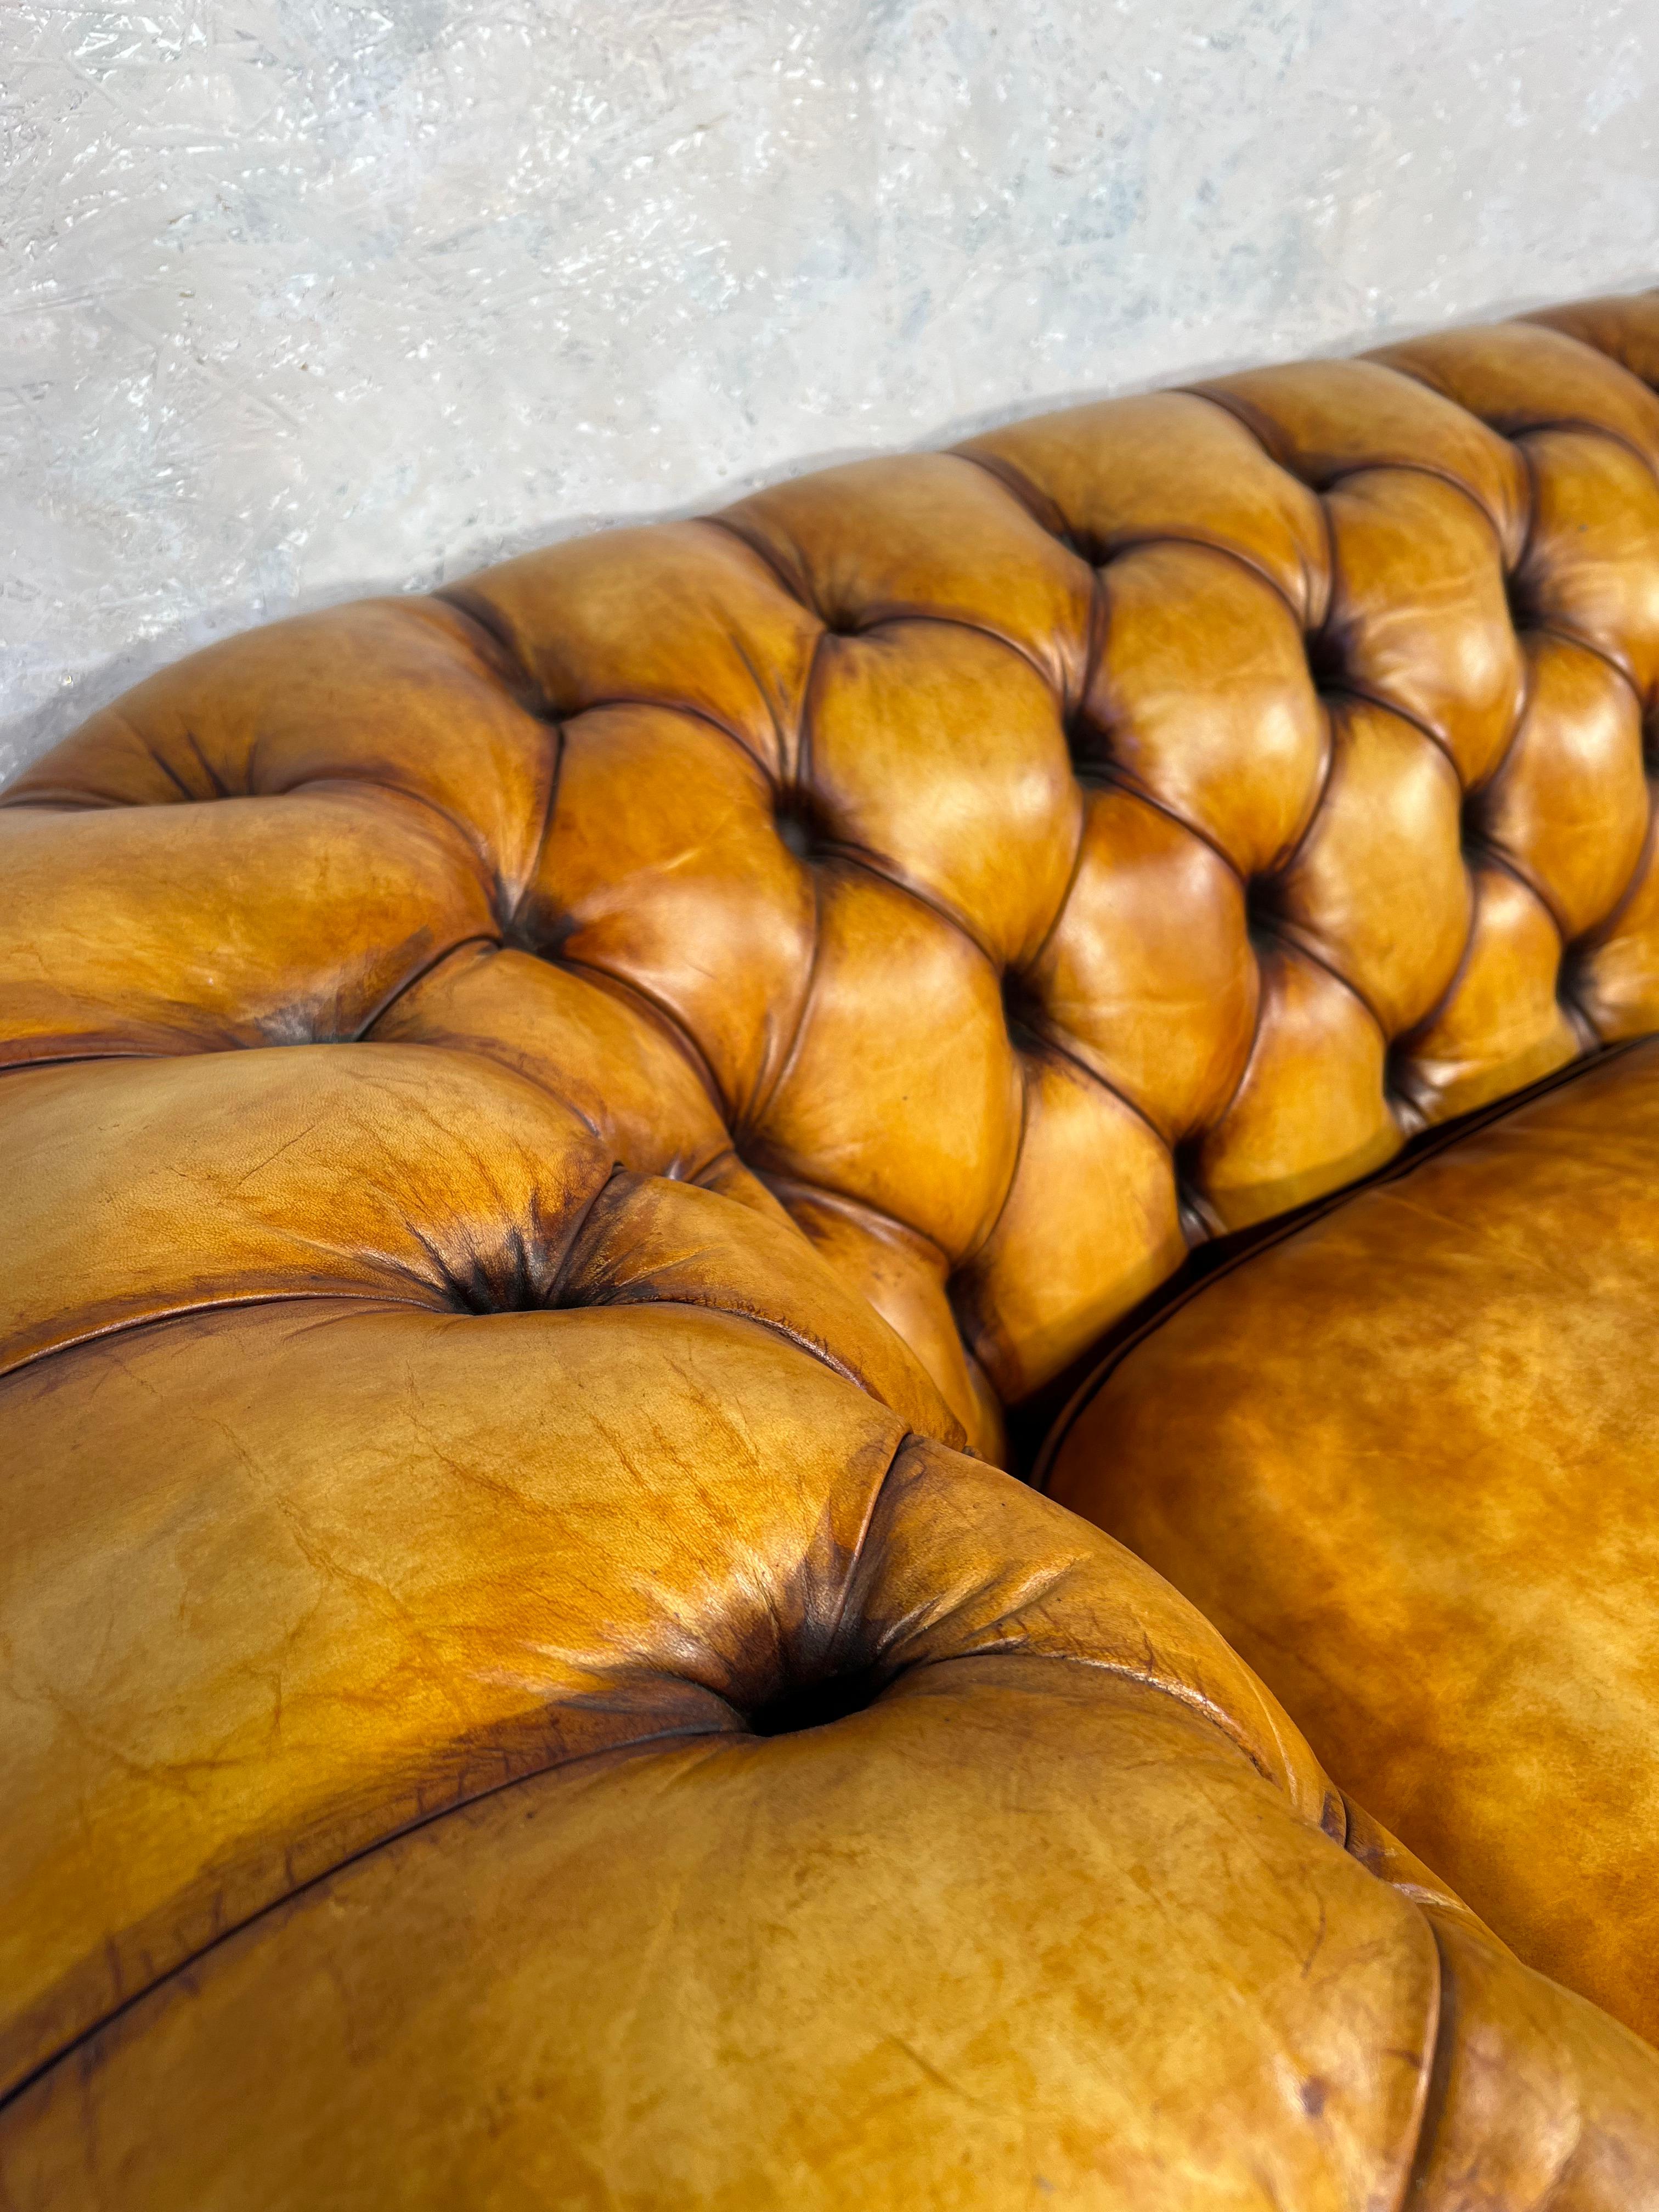 Exceptional Mid-Century Tan Leather Chesterfield Sofa Hand Dyed #249 1